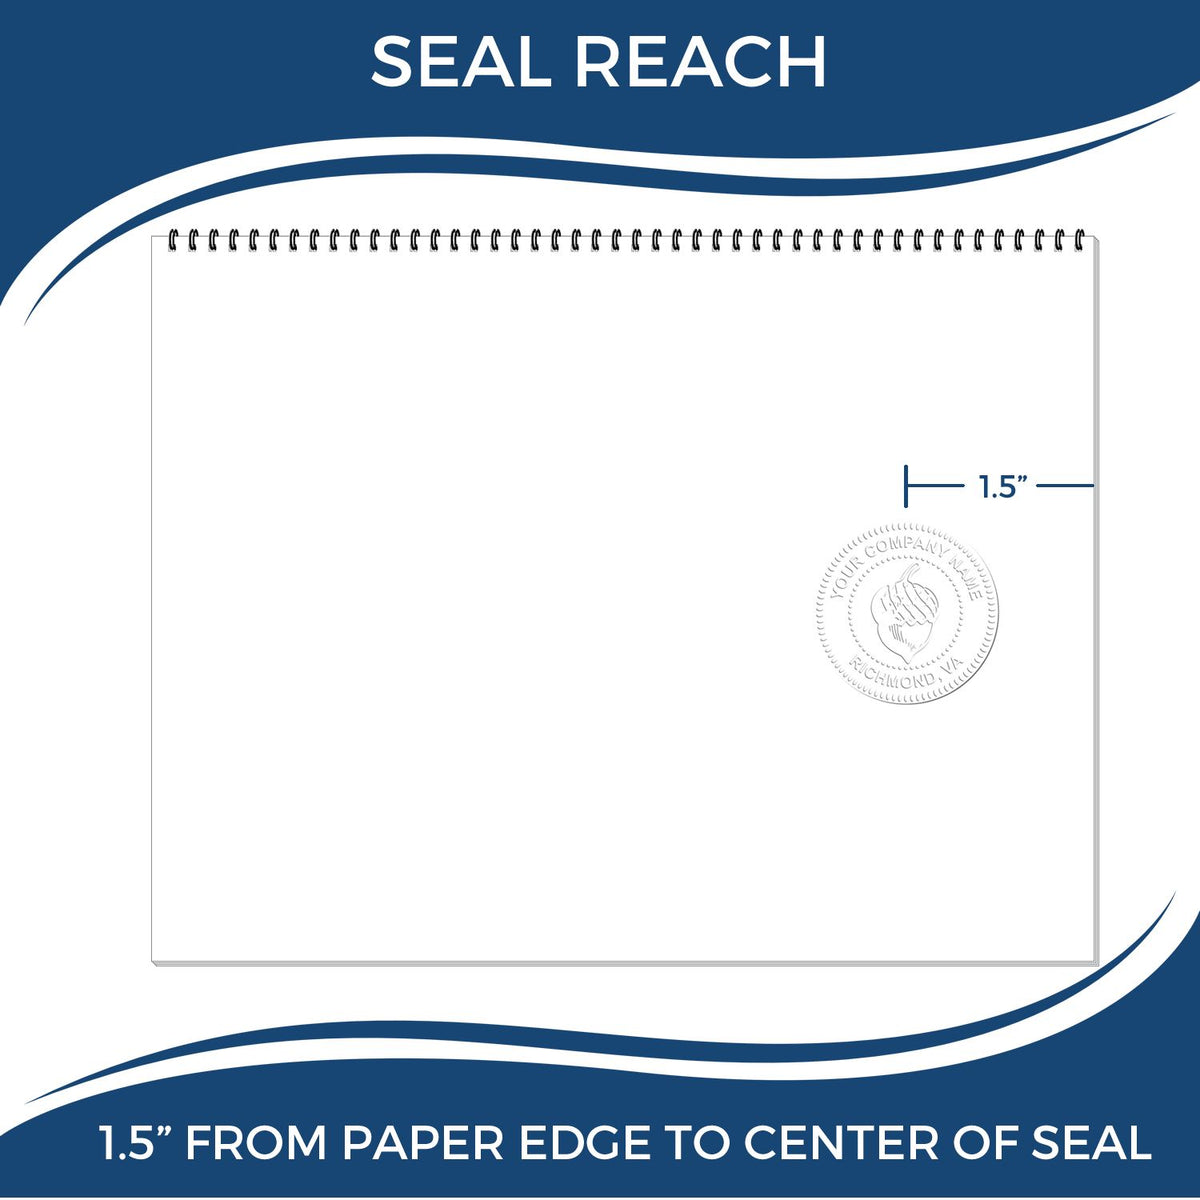 An infographic showing the seal reach which is represented by a ruler and a miniature seal image of the Gift Maine Land Surveyor Seal